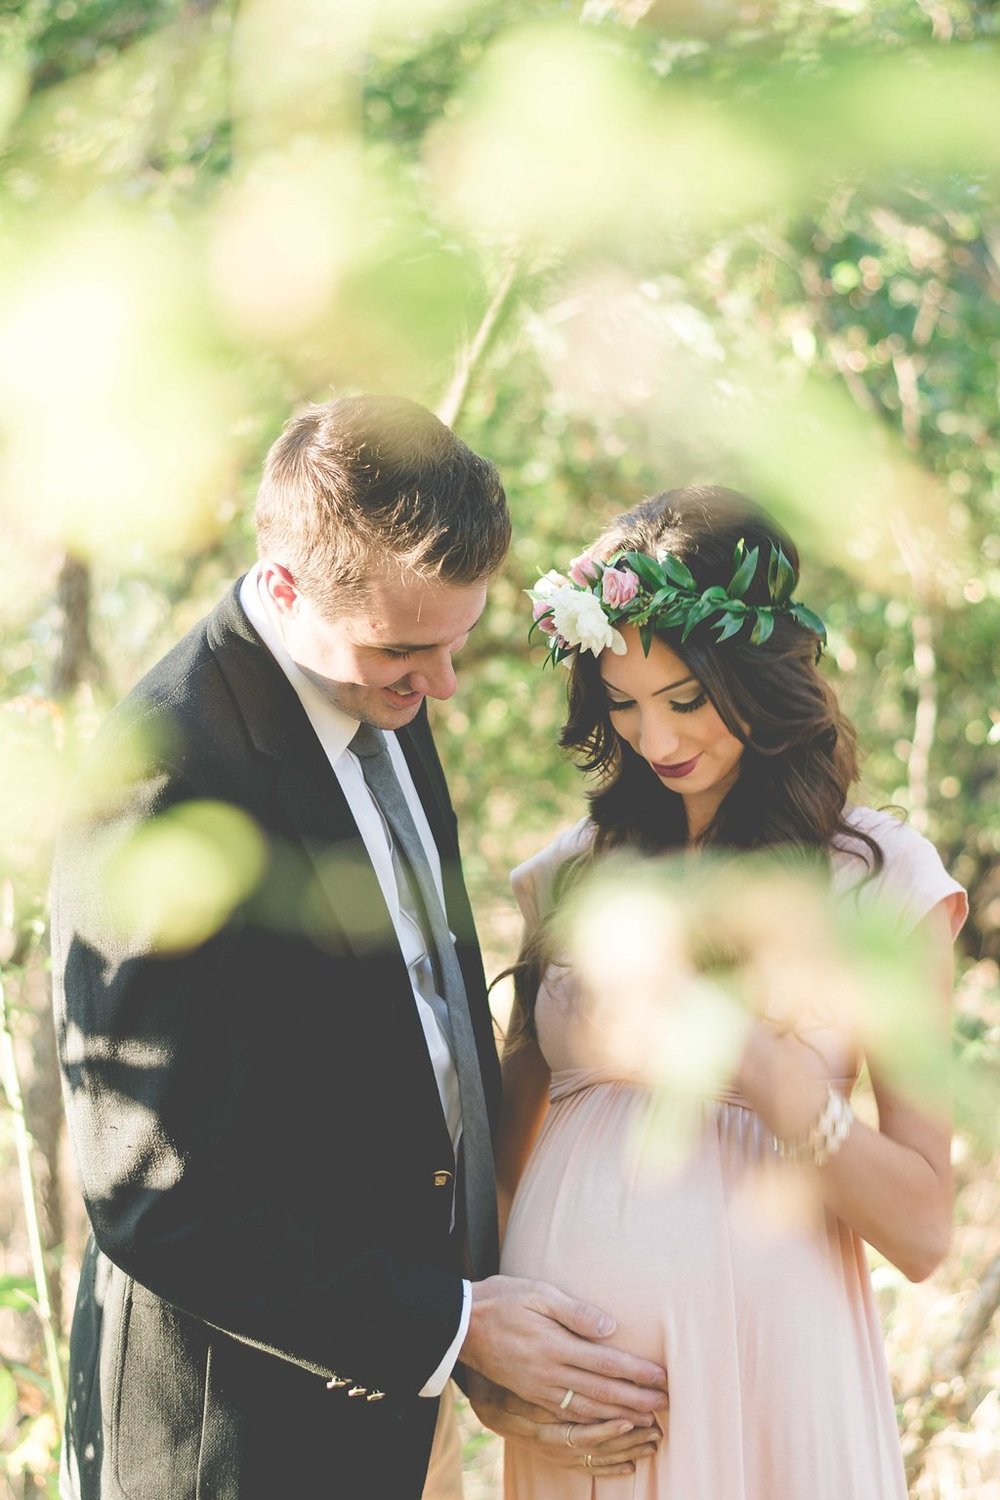 A couple expecting a child poses for the best event photographer in a serene forest setting in.jpg